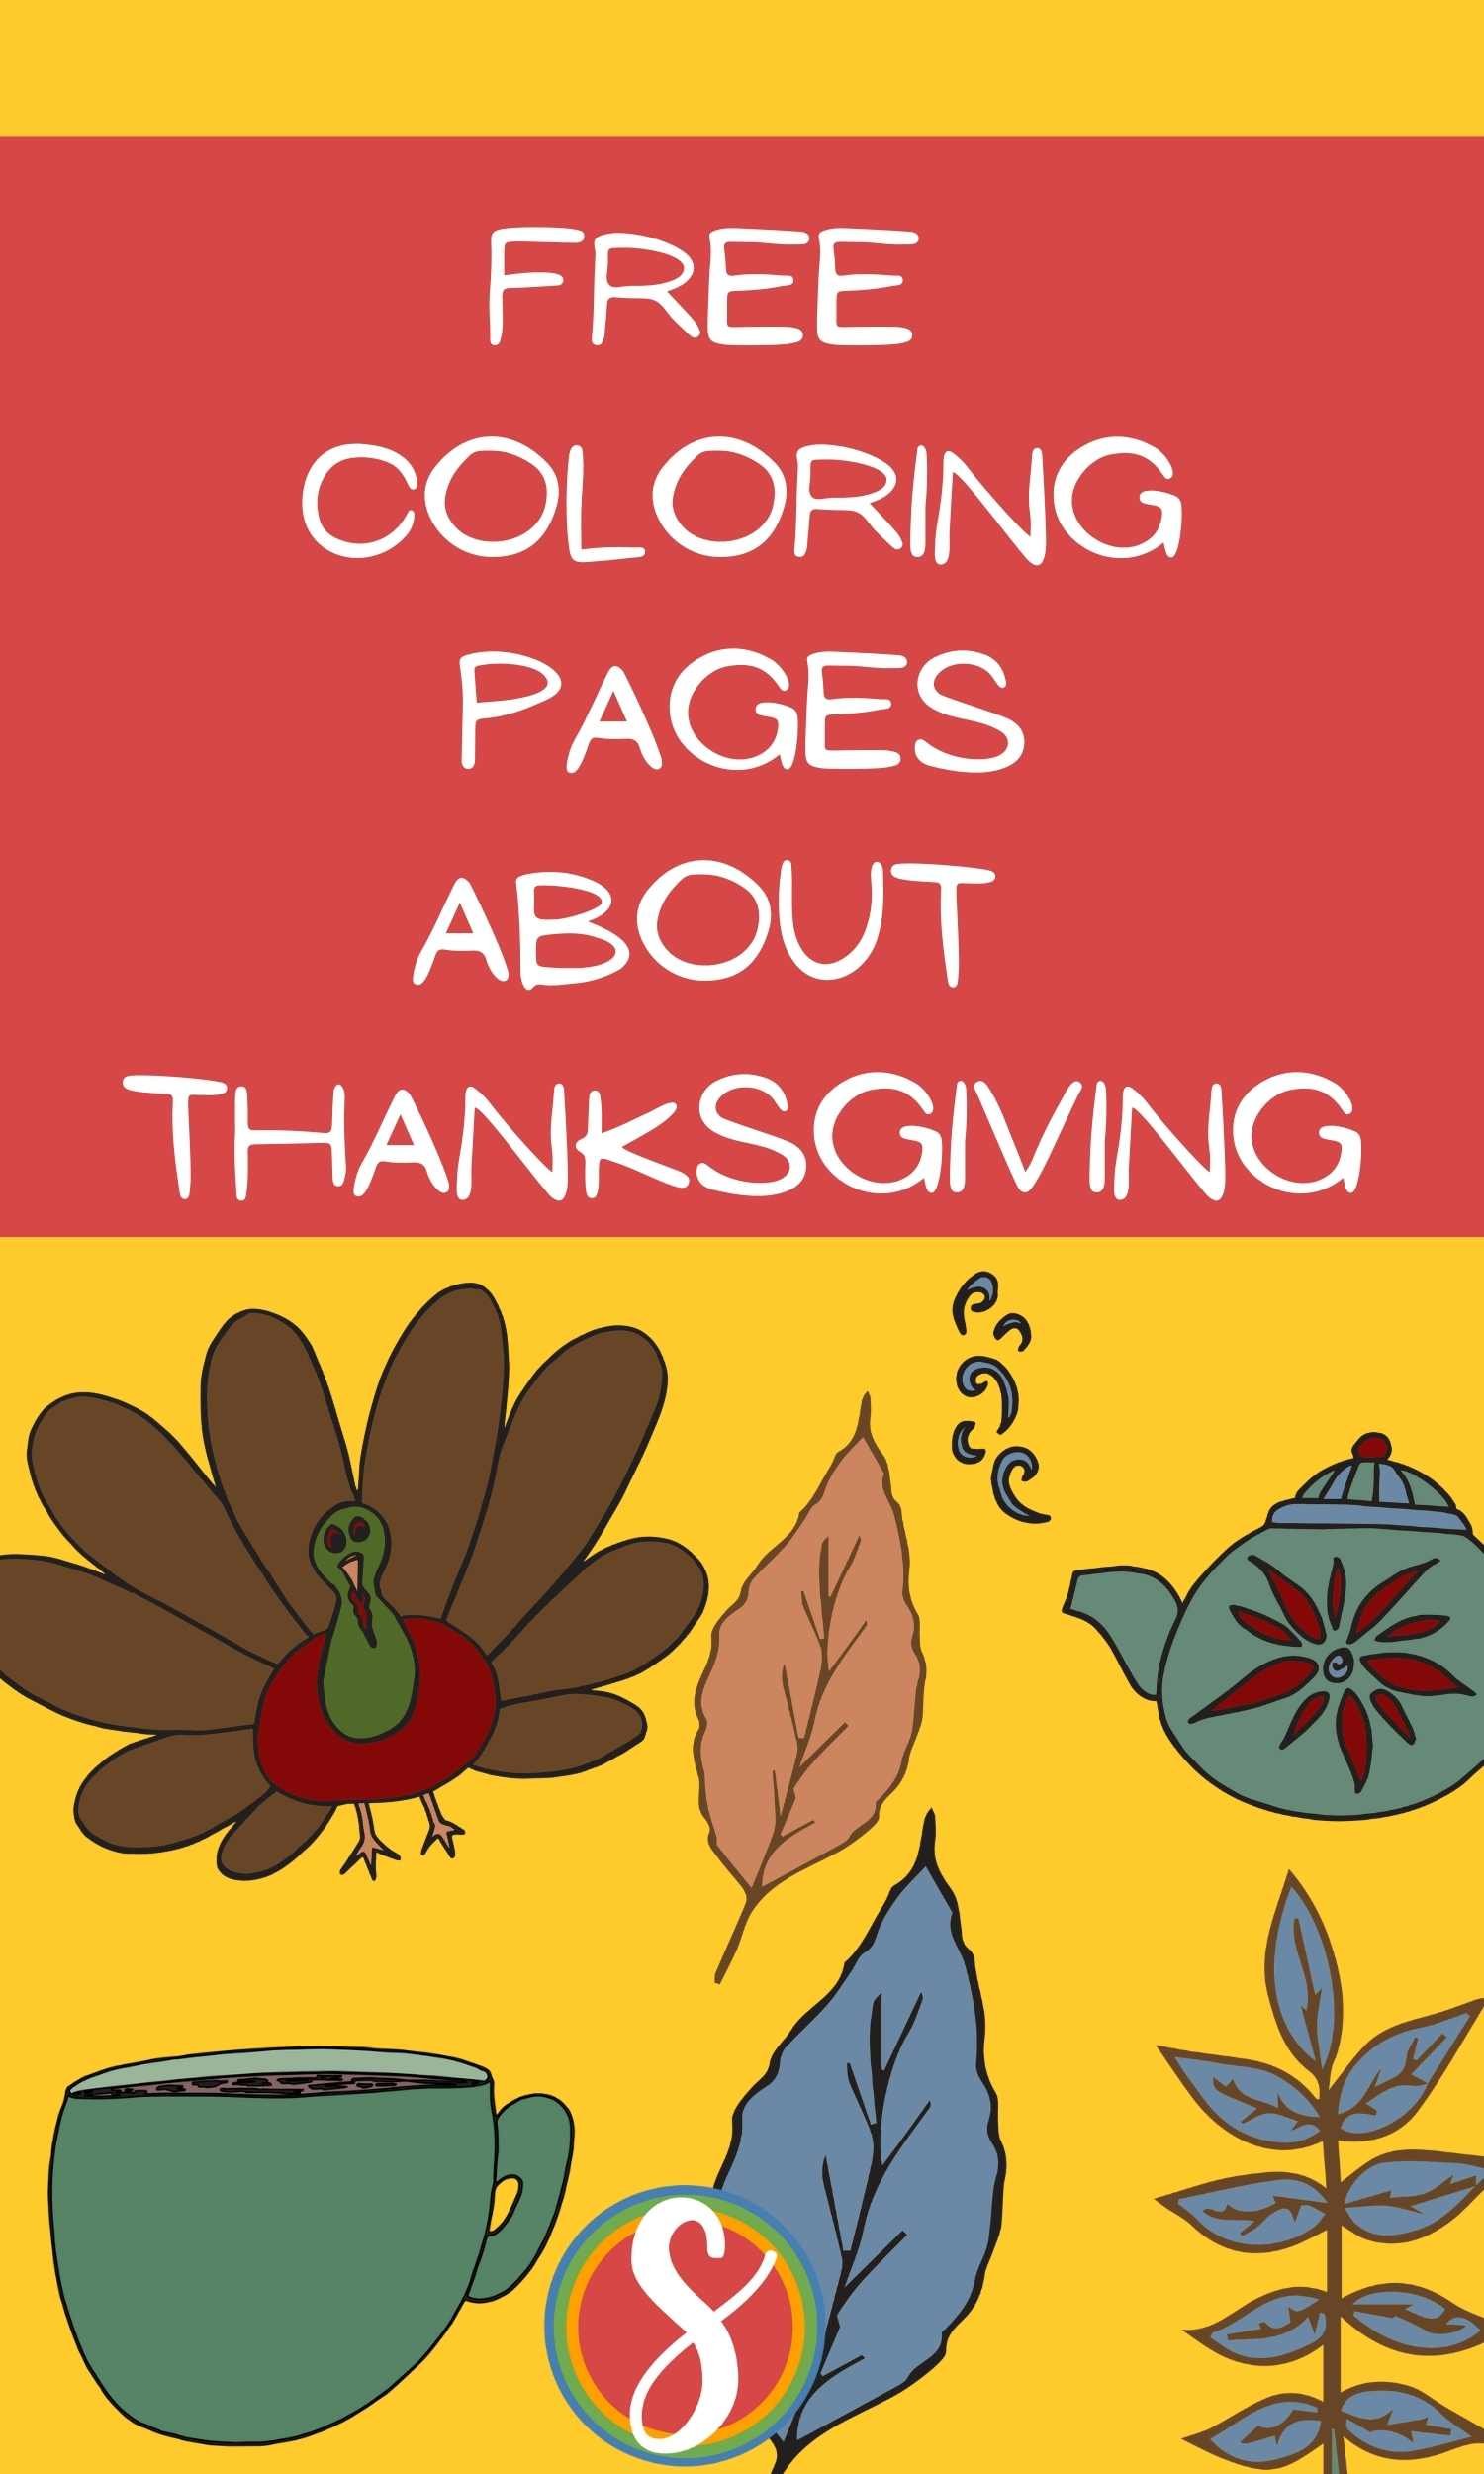 Text "free coloring pages about thanksgiving" images of turkey, pie, feathers